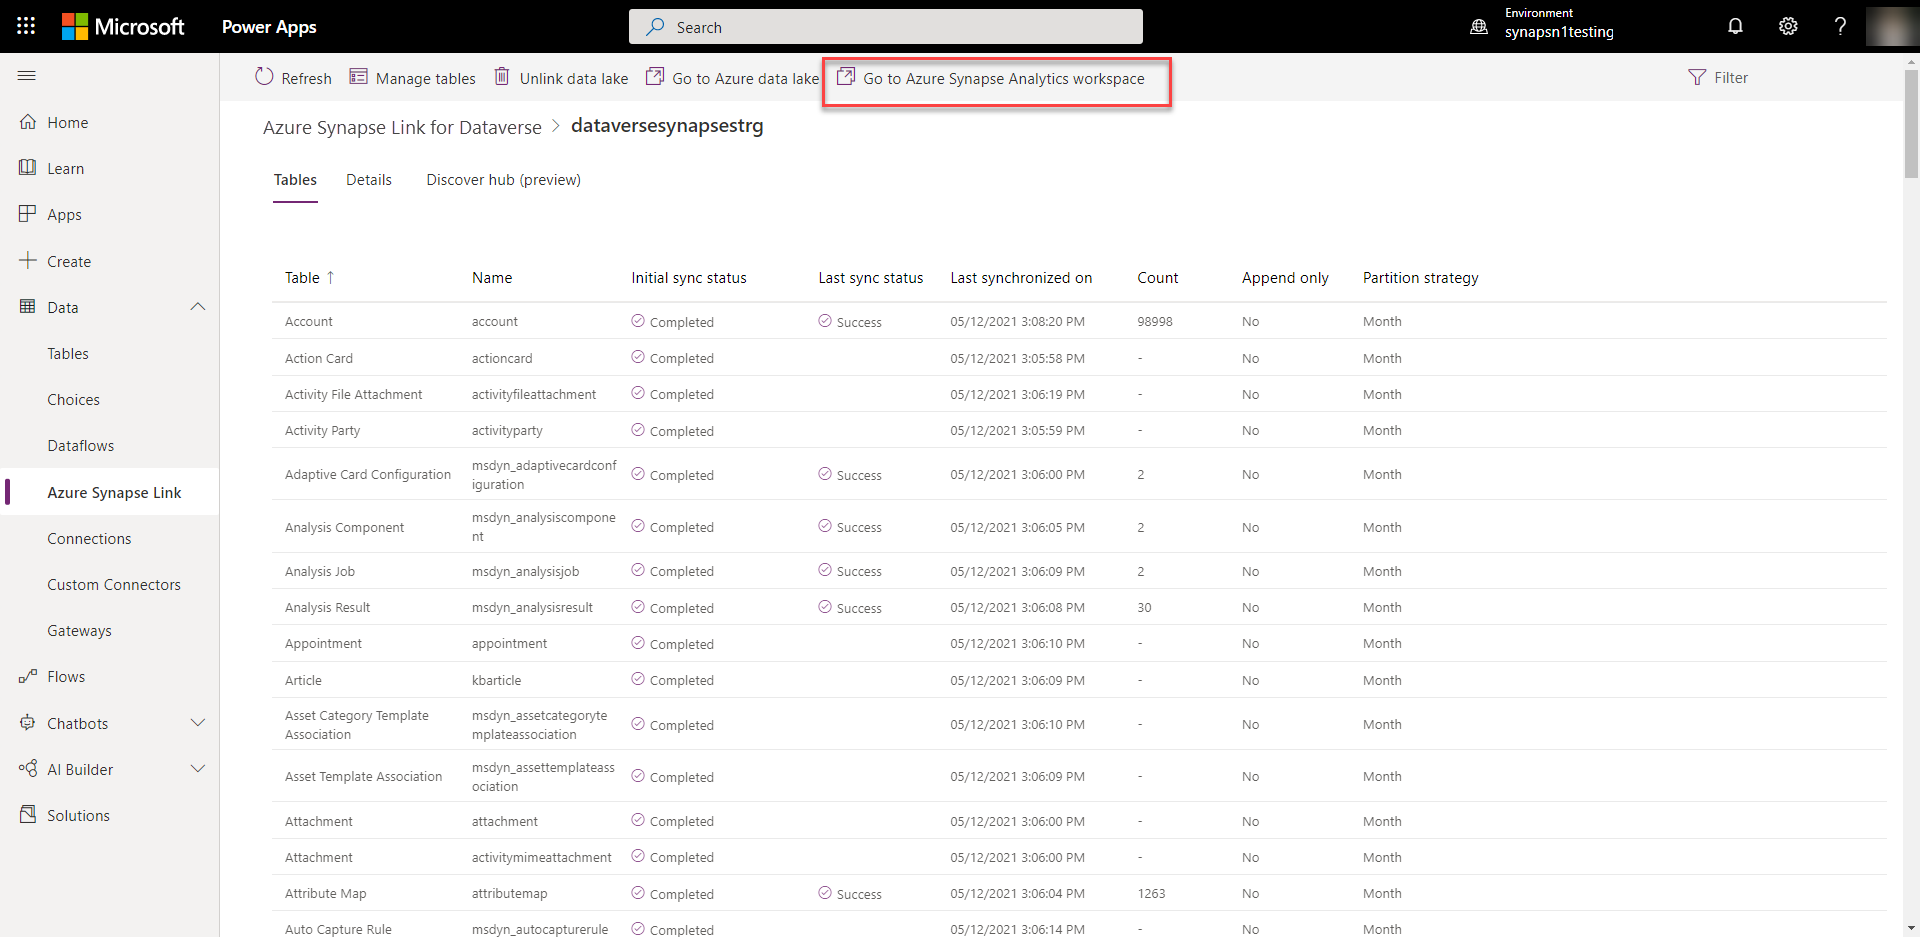 You can launch your Azure Synapse workspace and view your Dataverse data with a single click